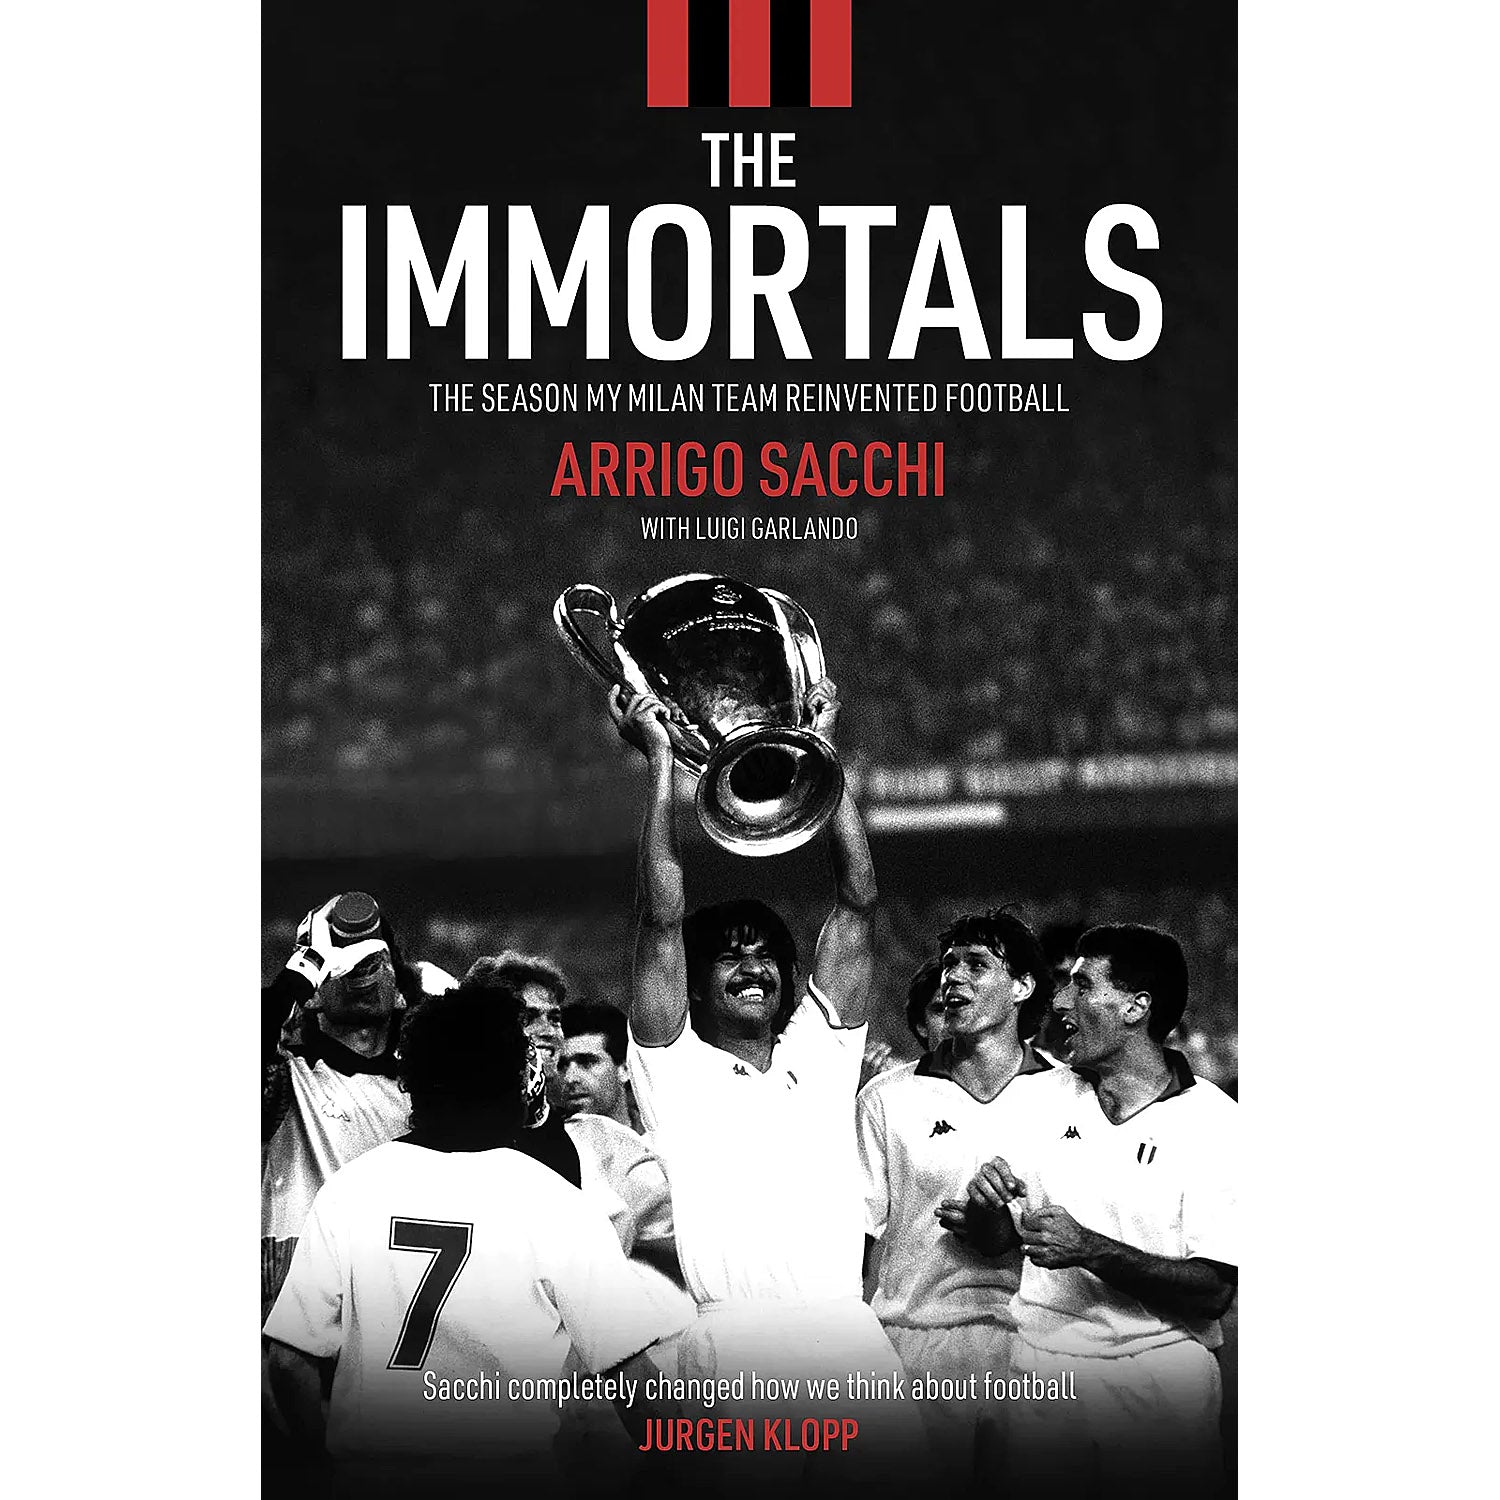 The Immortals – The Season My Milan Team Reinvented Football